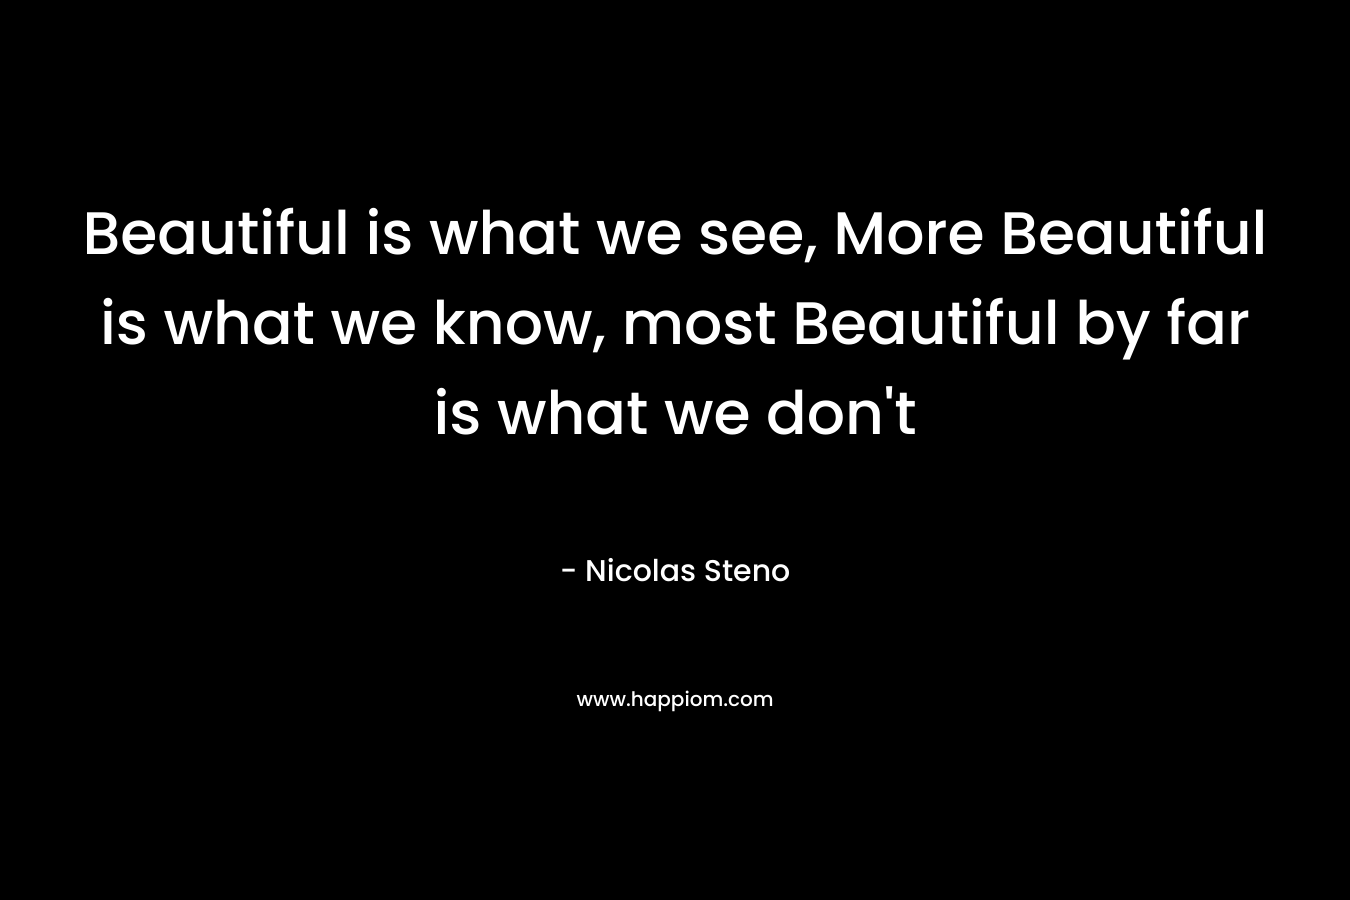 Beautiful is what we see, More Beautiful is what we know, most Beautiful by far is what we don't